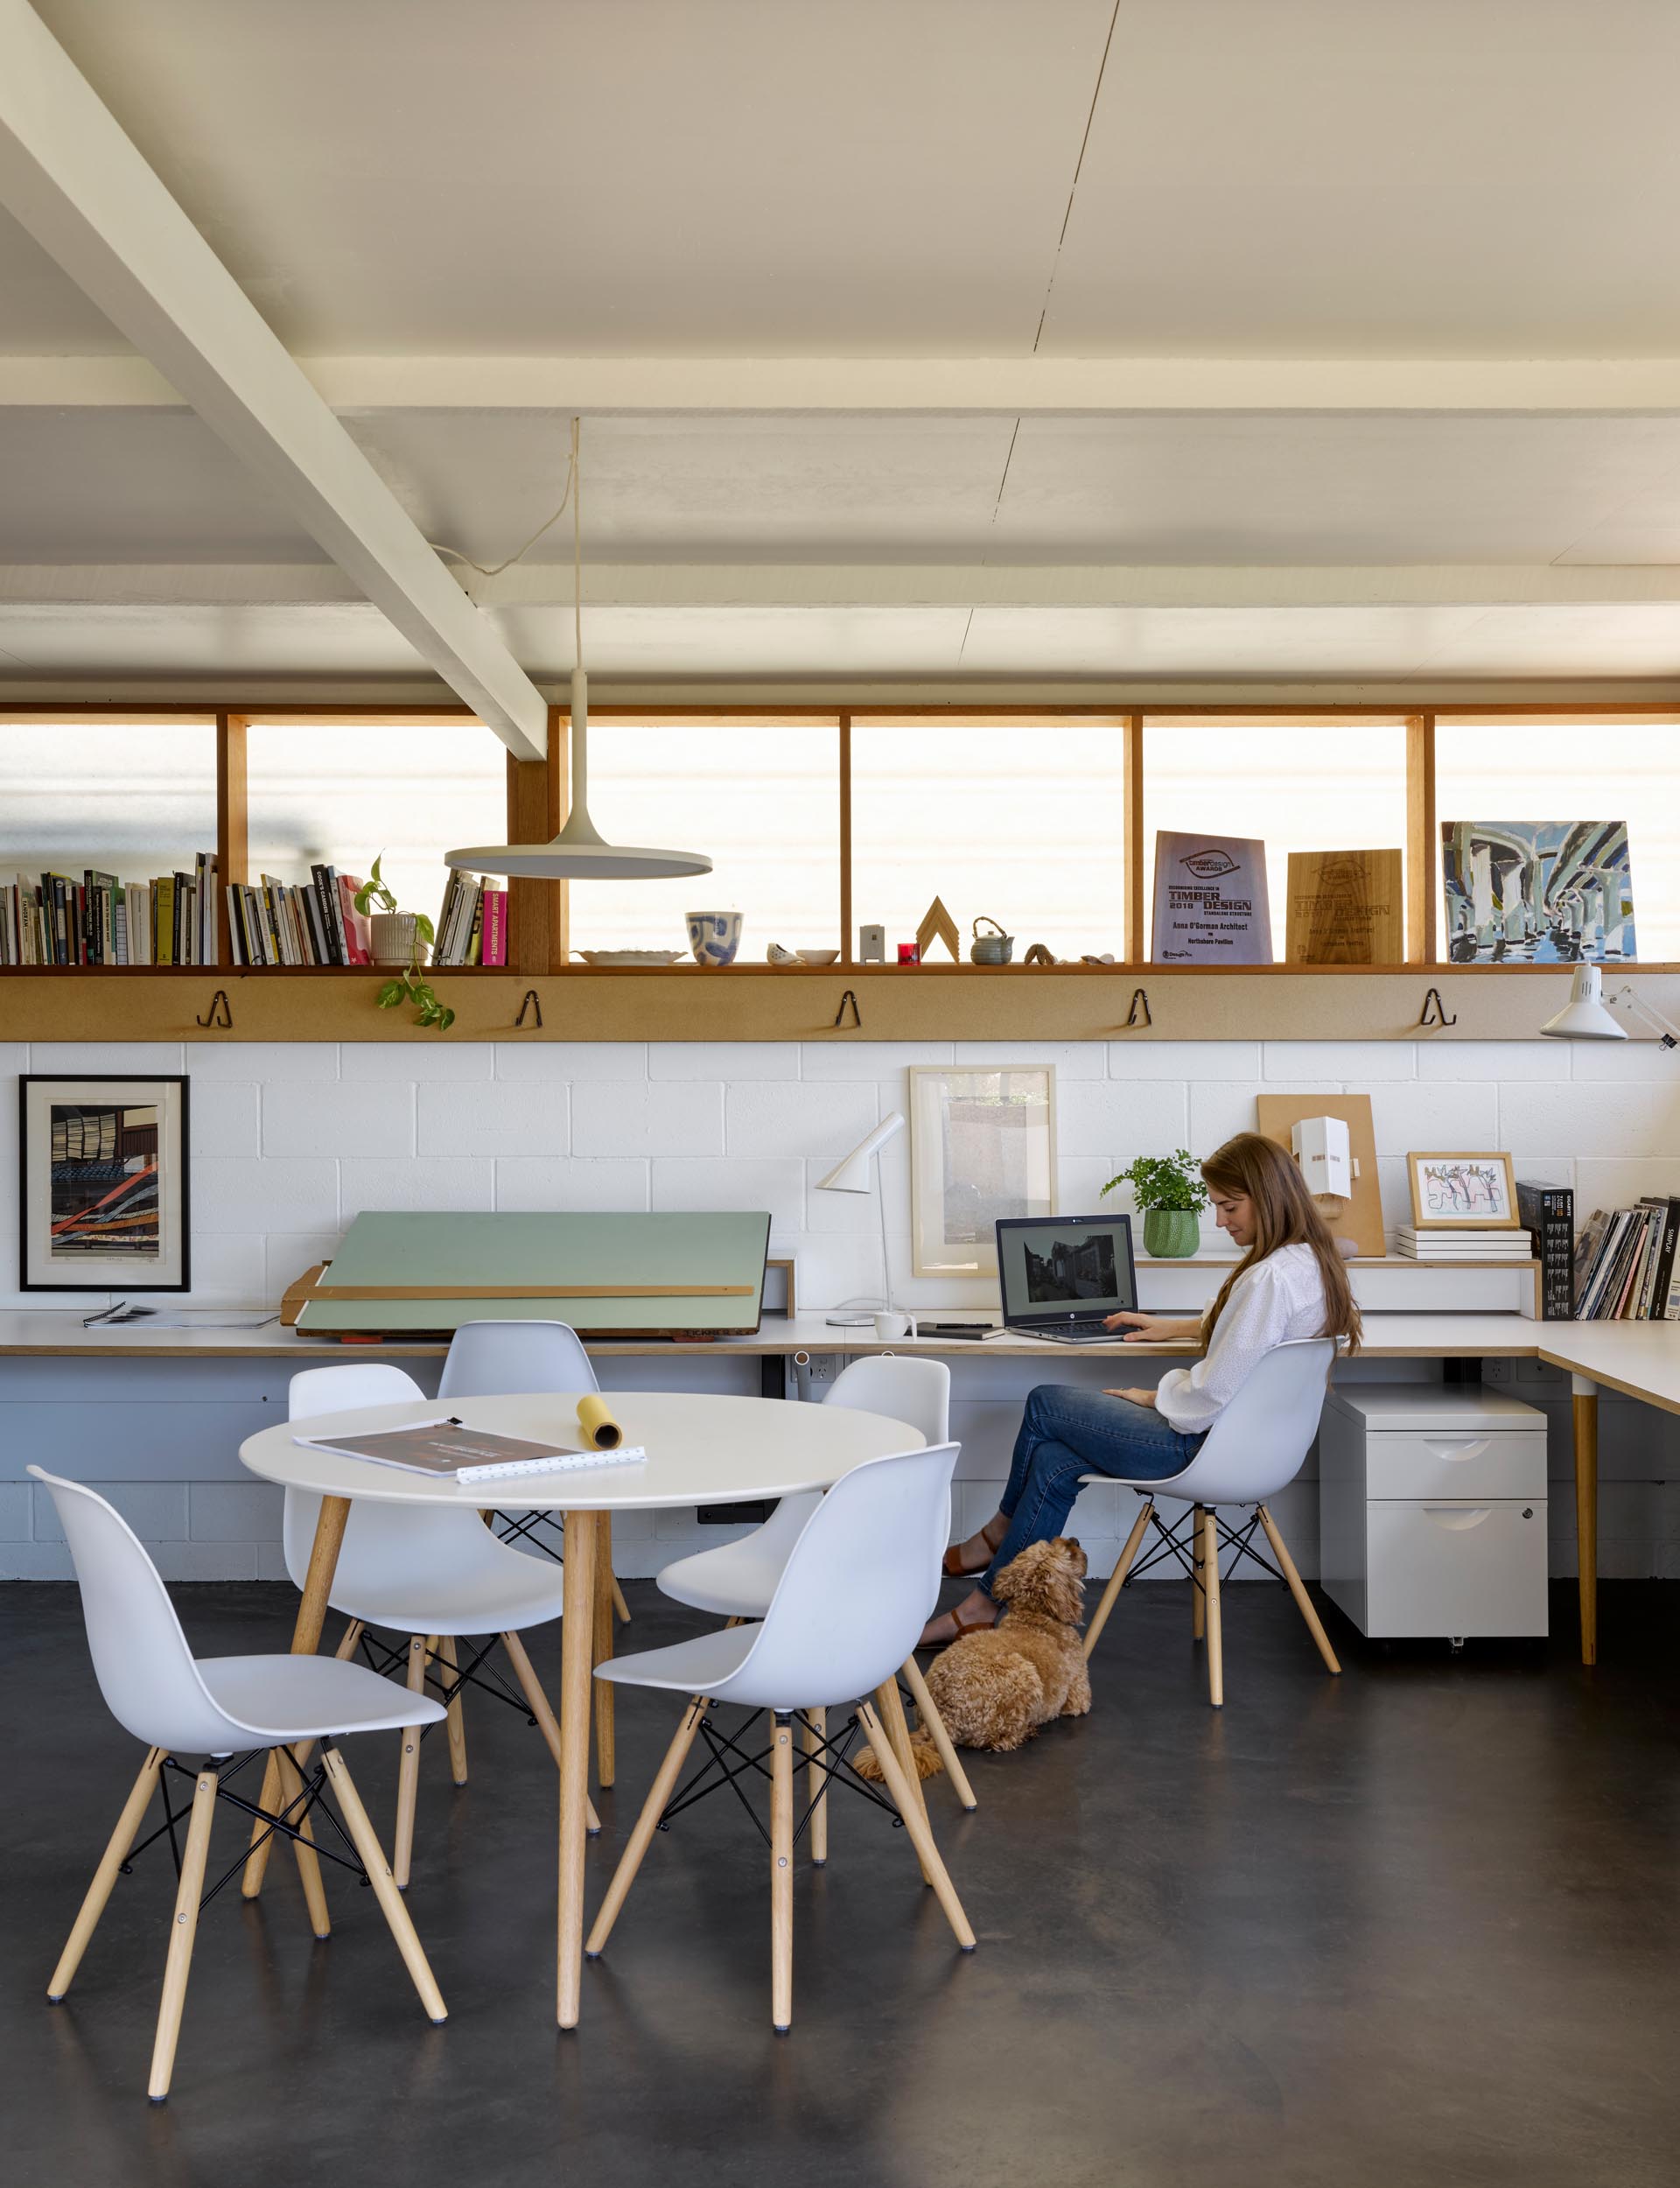 A converted carport is now an office for 4-5 people, and can be used as a secondary suite in the future.